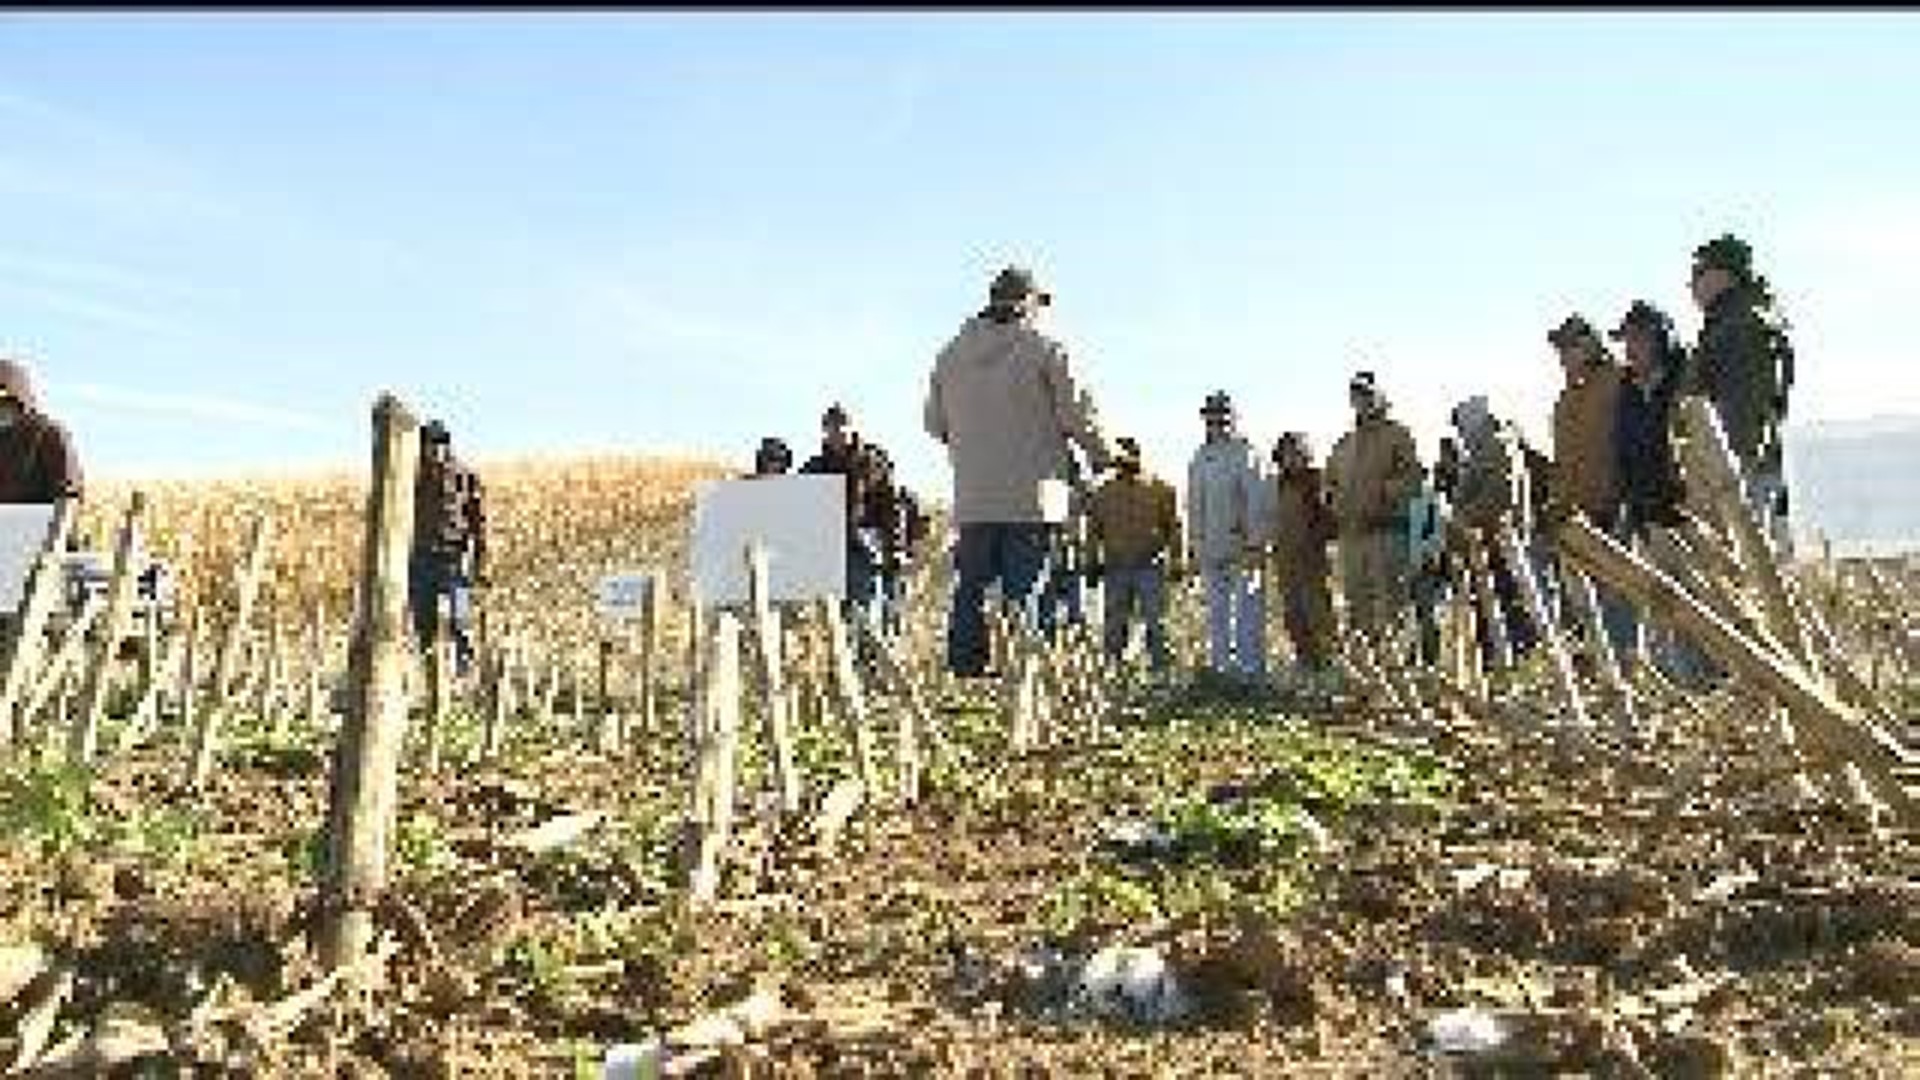 Farmers fight soil erosion with cover crops